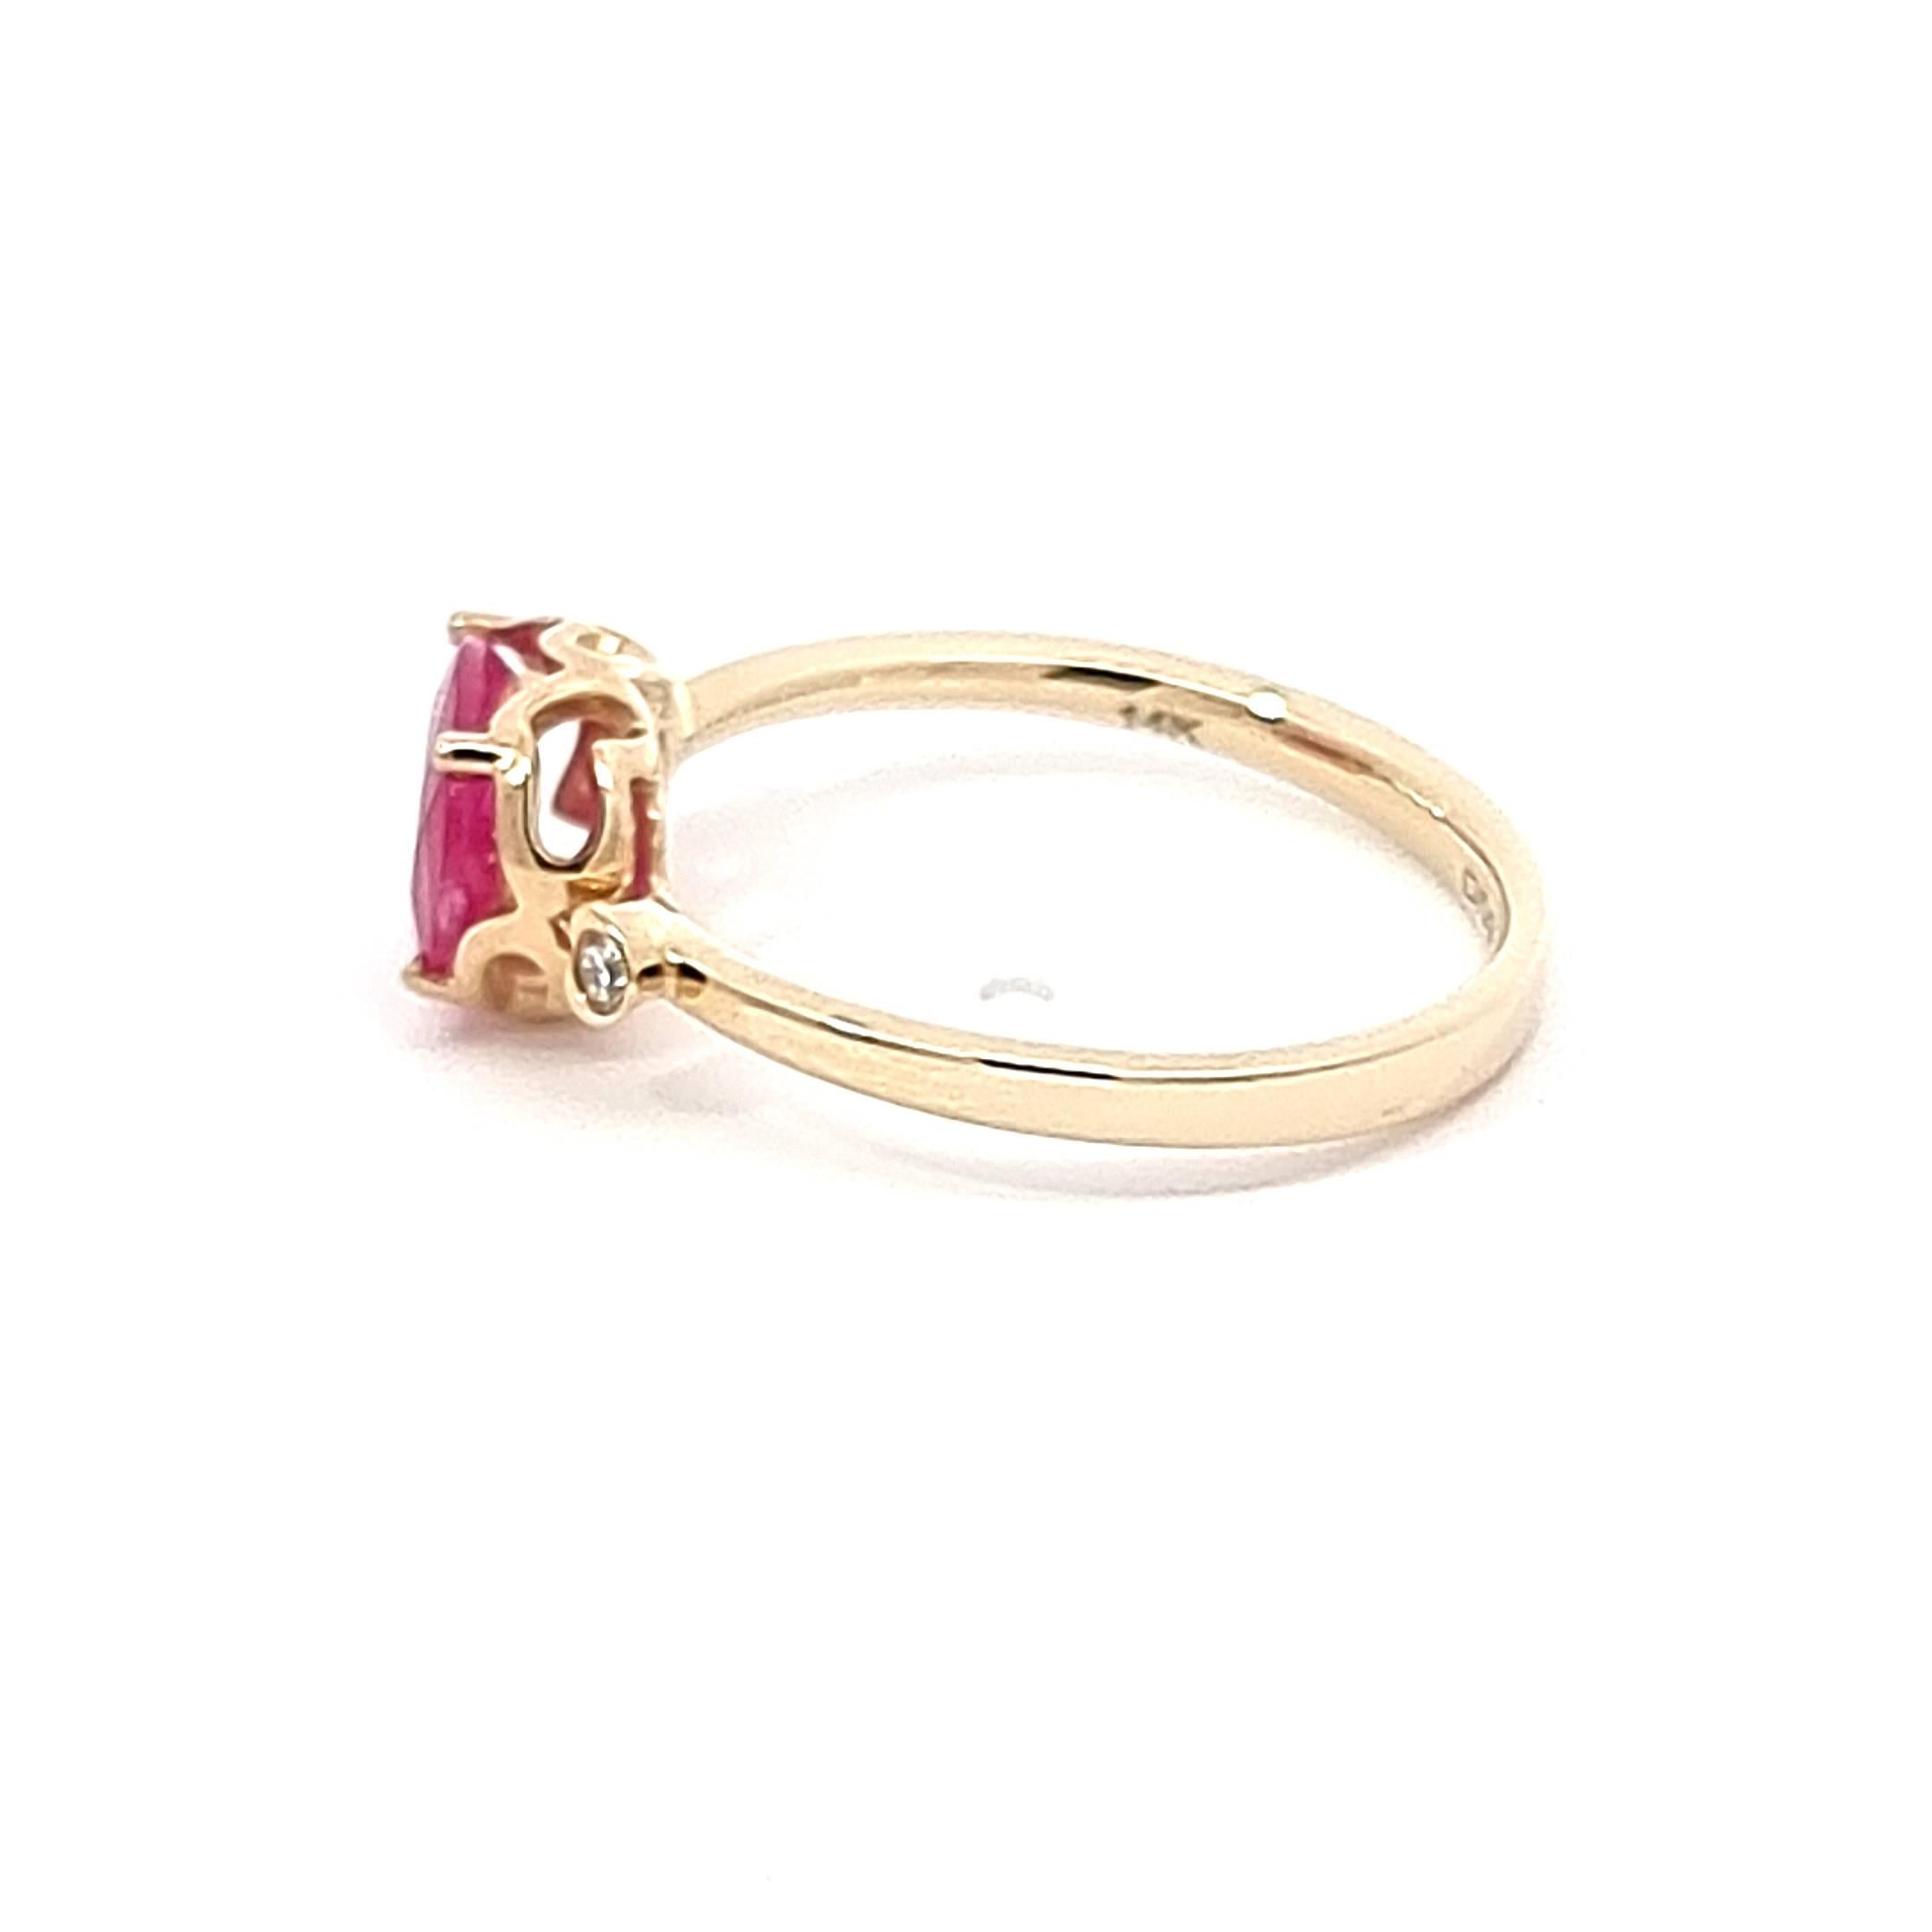 Indulge in radiance with our 14K Yellow Gold Ring, a symphony of elegance and flair. The star of the show is a captivating oval-shaped ruby, a vibrant 1.34-carat embodiment of passion and luxury. Accompanied by two dazzling white diamonds on the